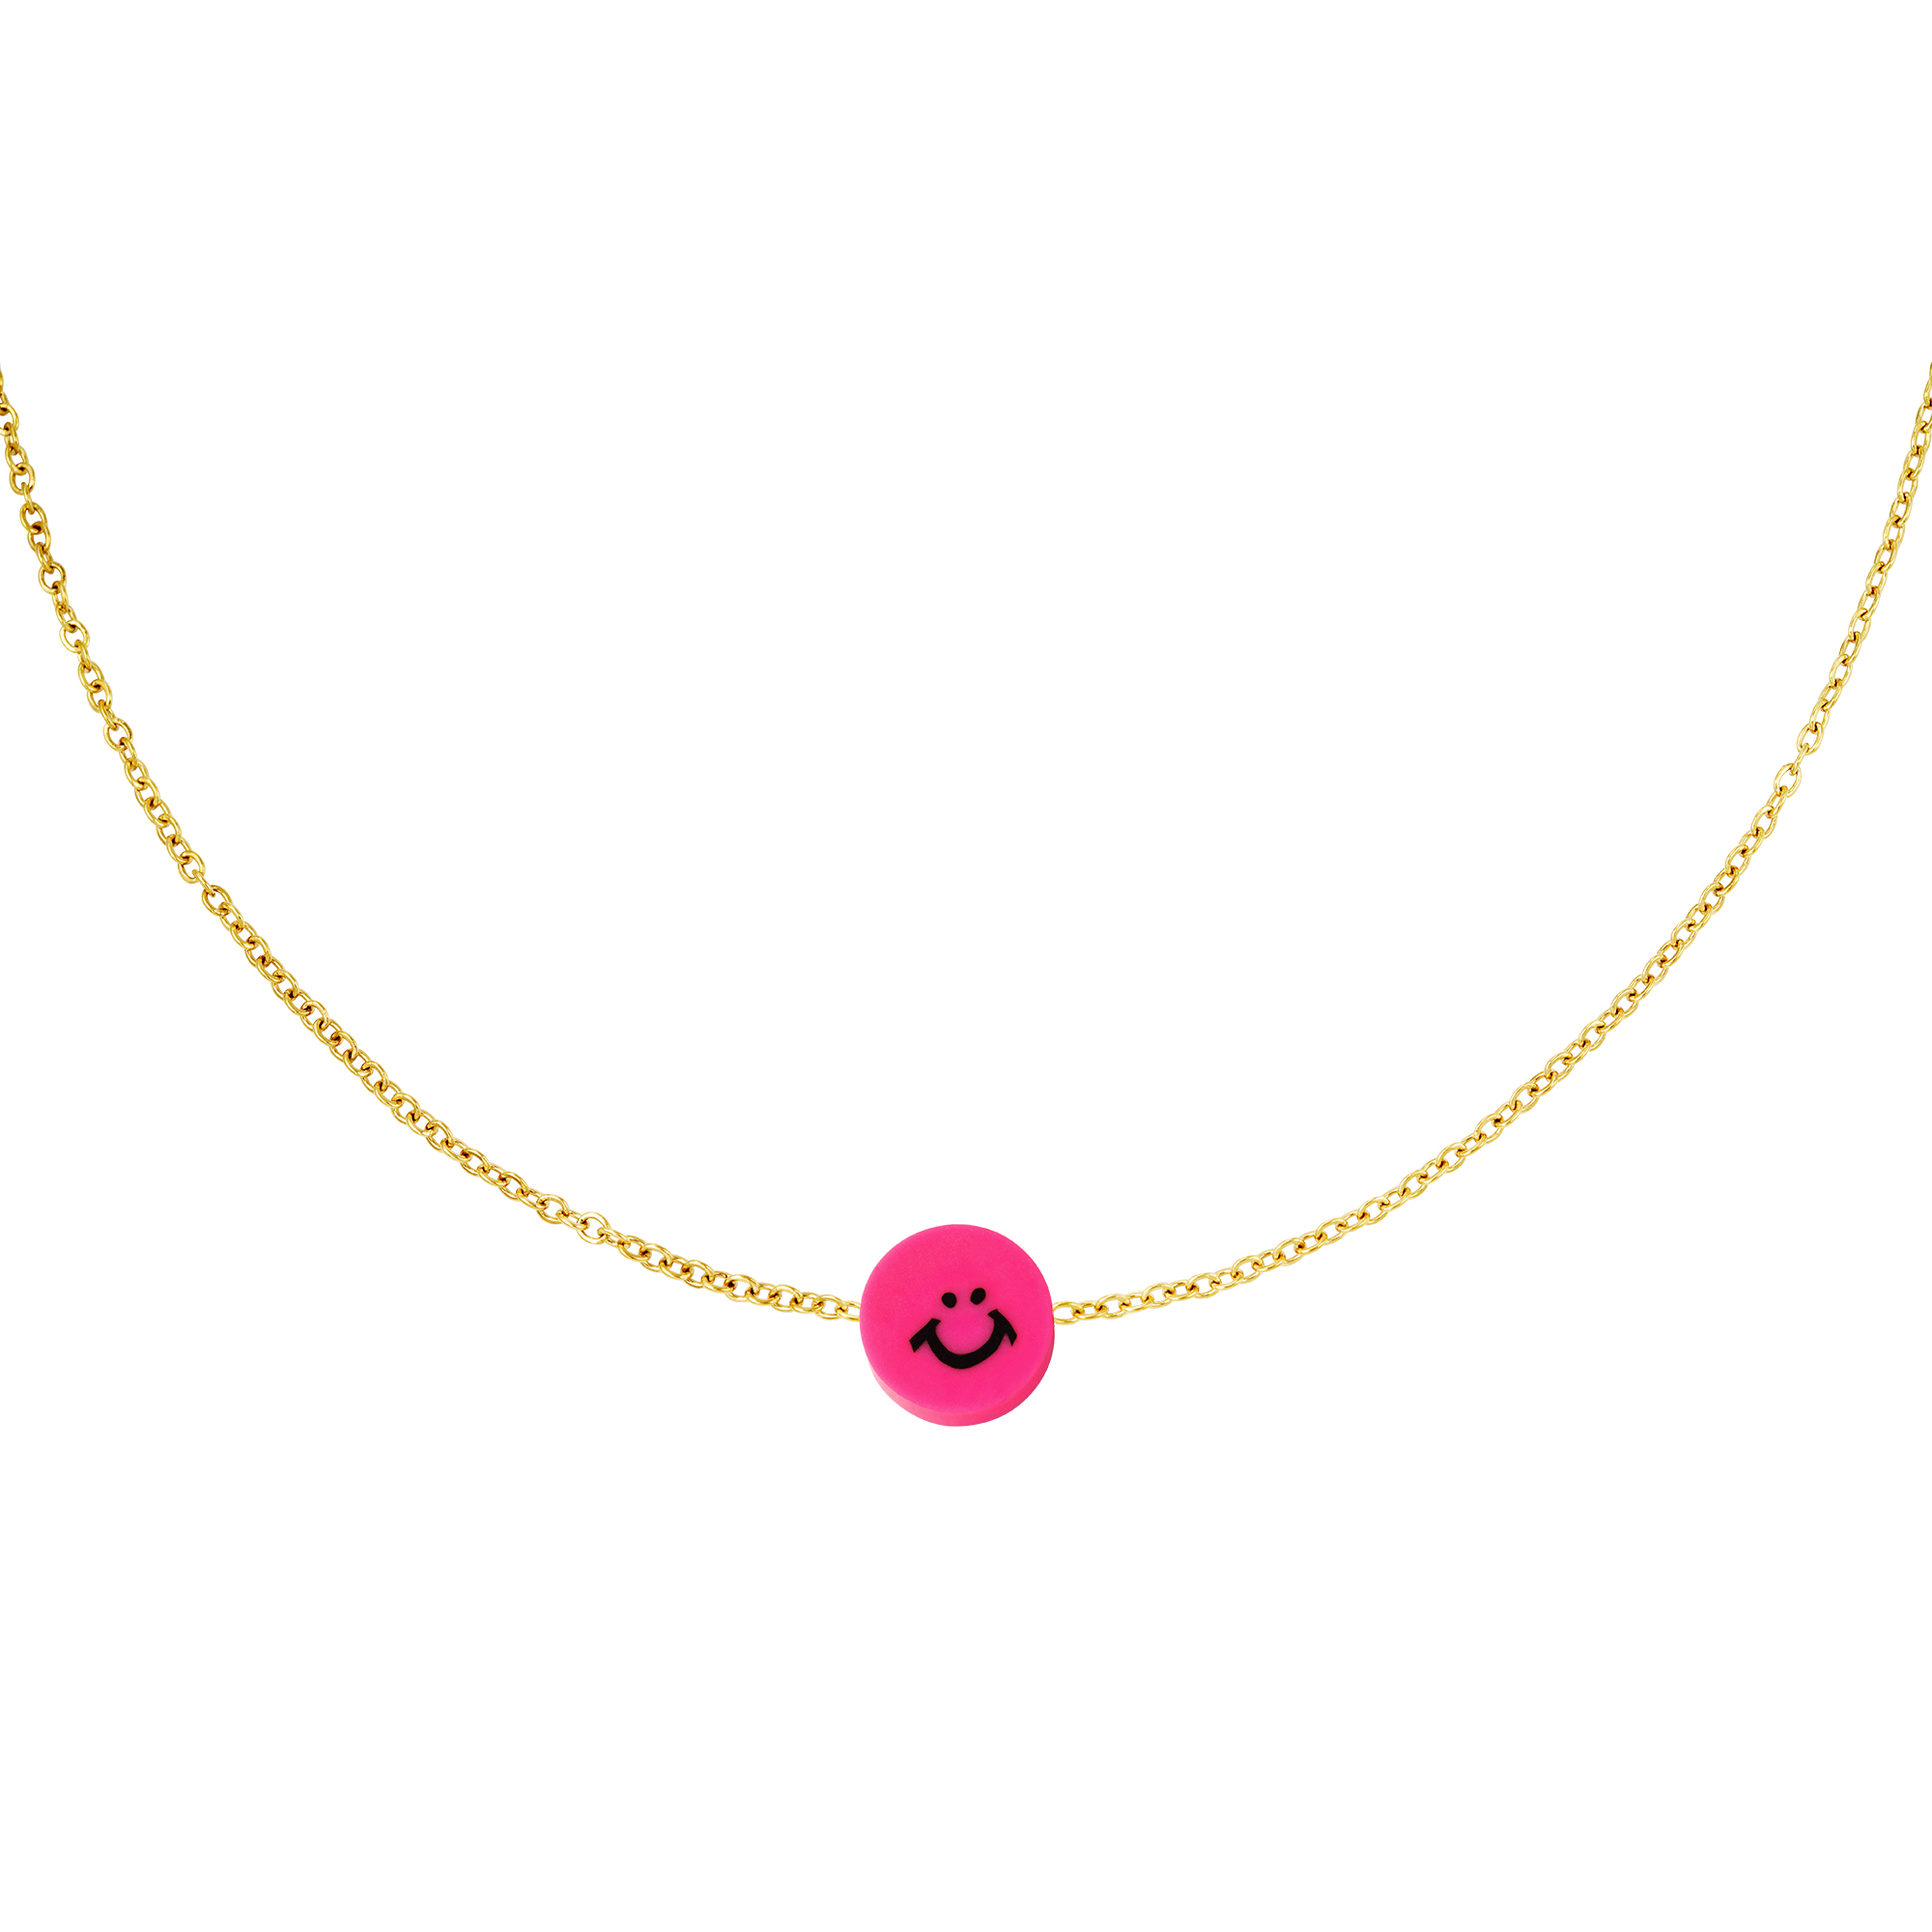 Stainless steel necklace smiley